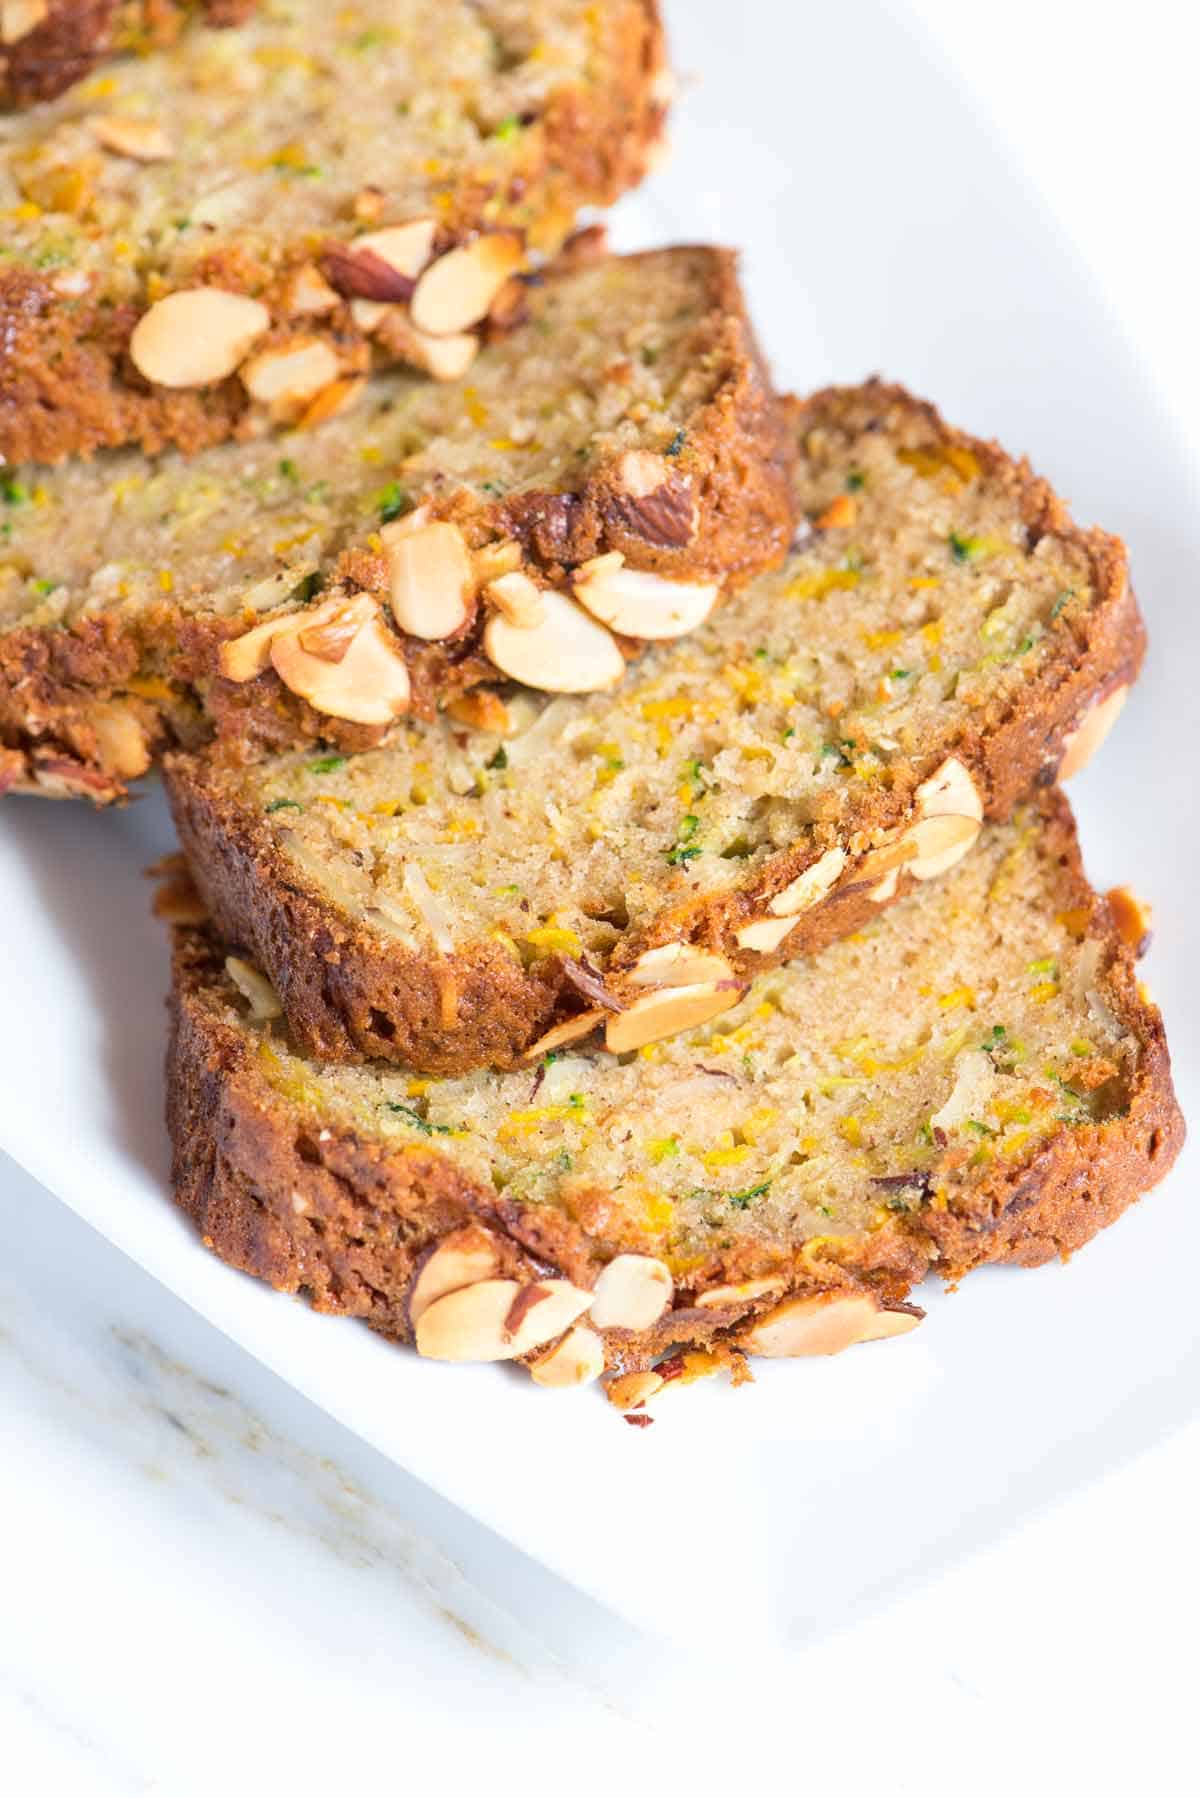 How to Make The Best Zucchini Bread